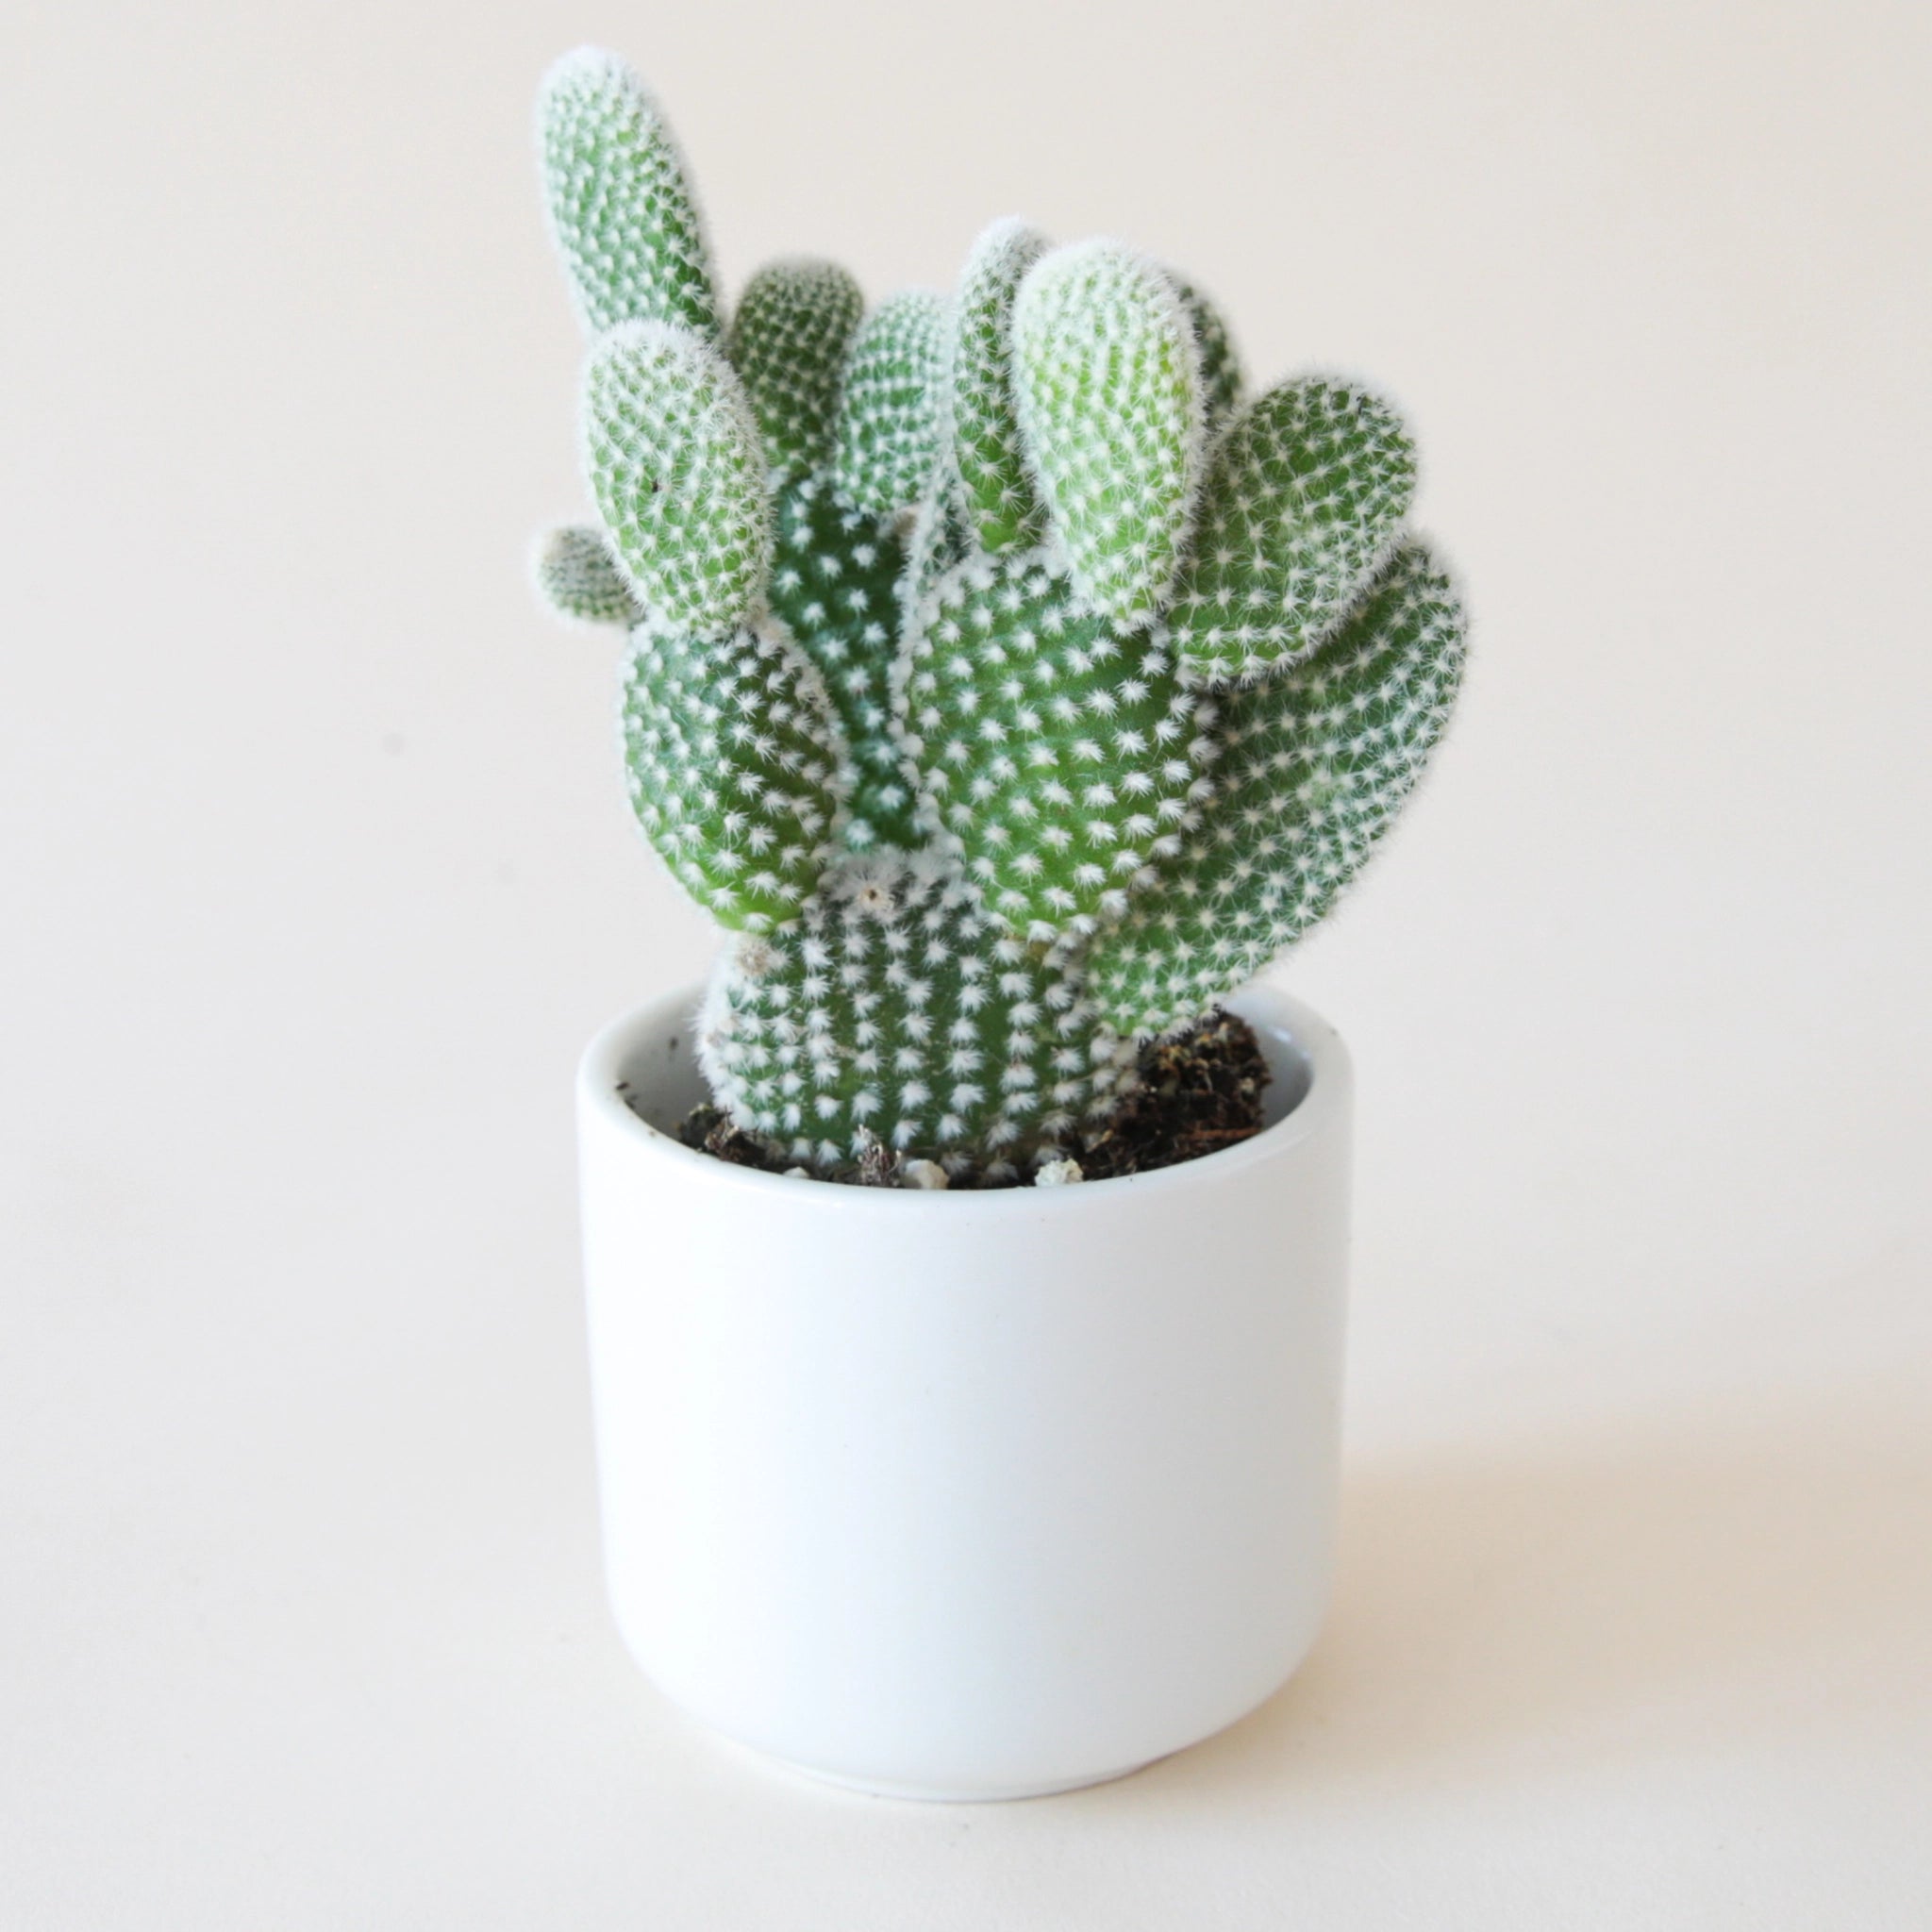 angel wing cactus in a small white pot